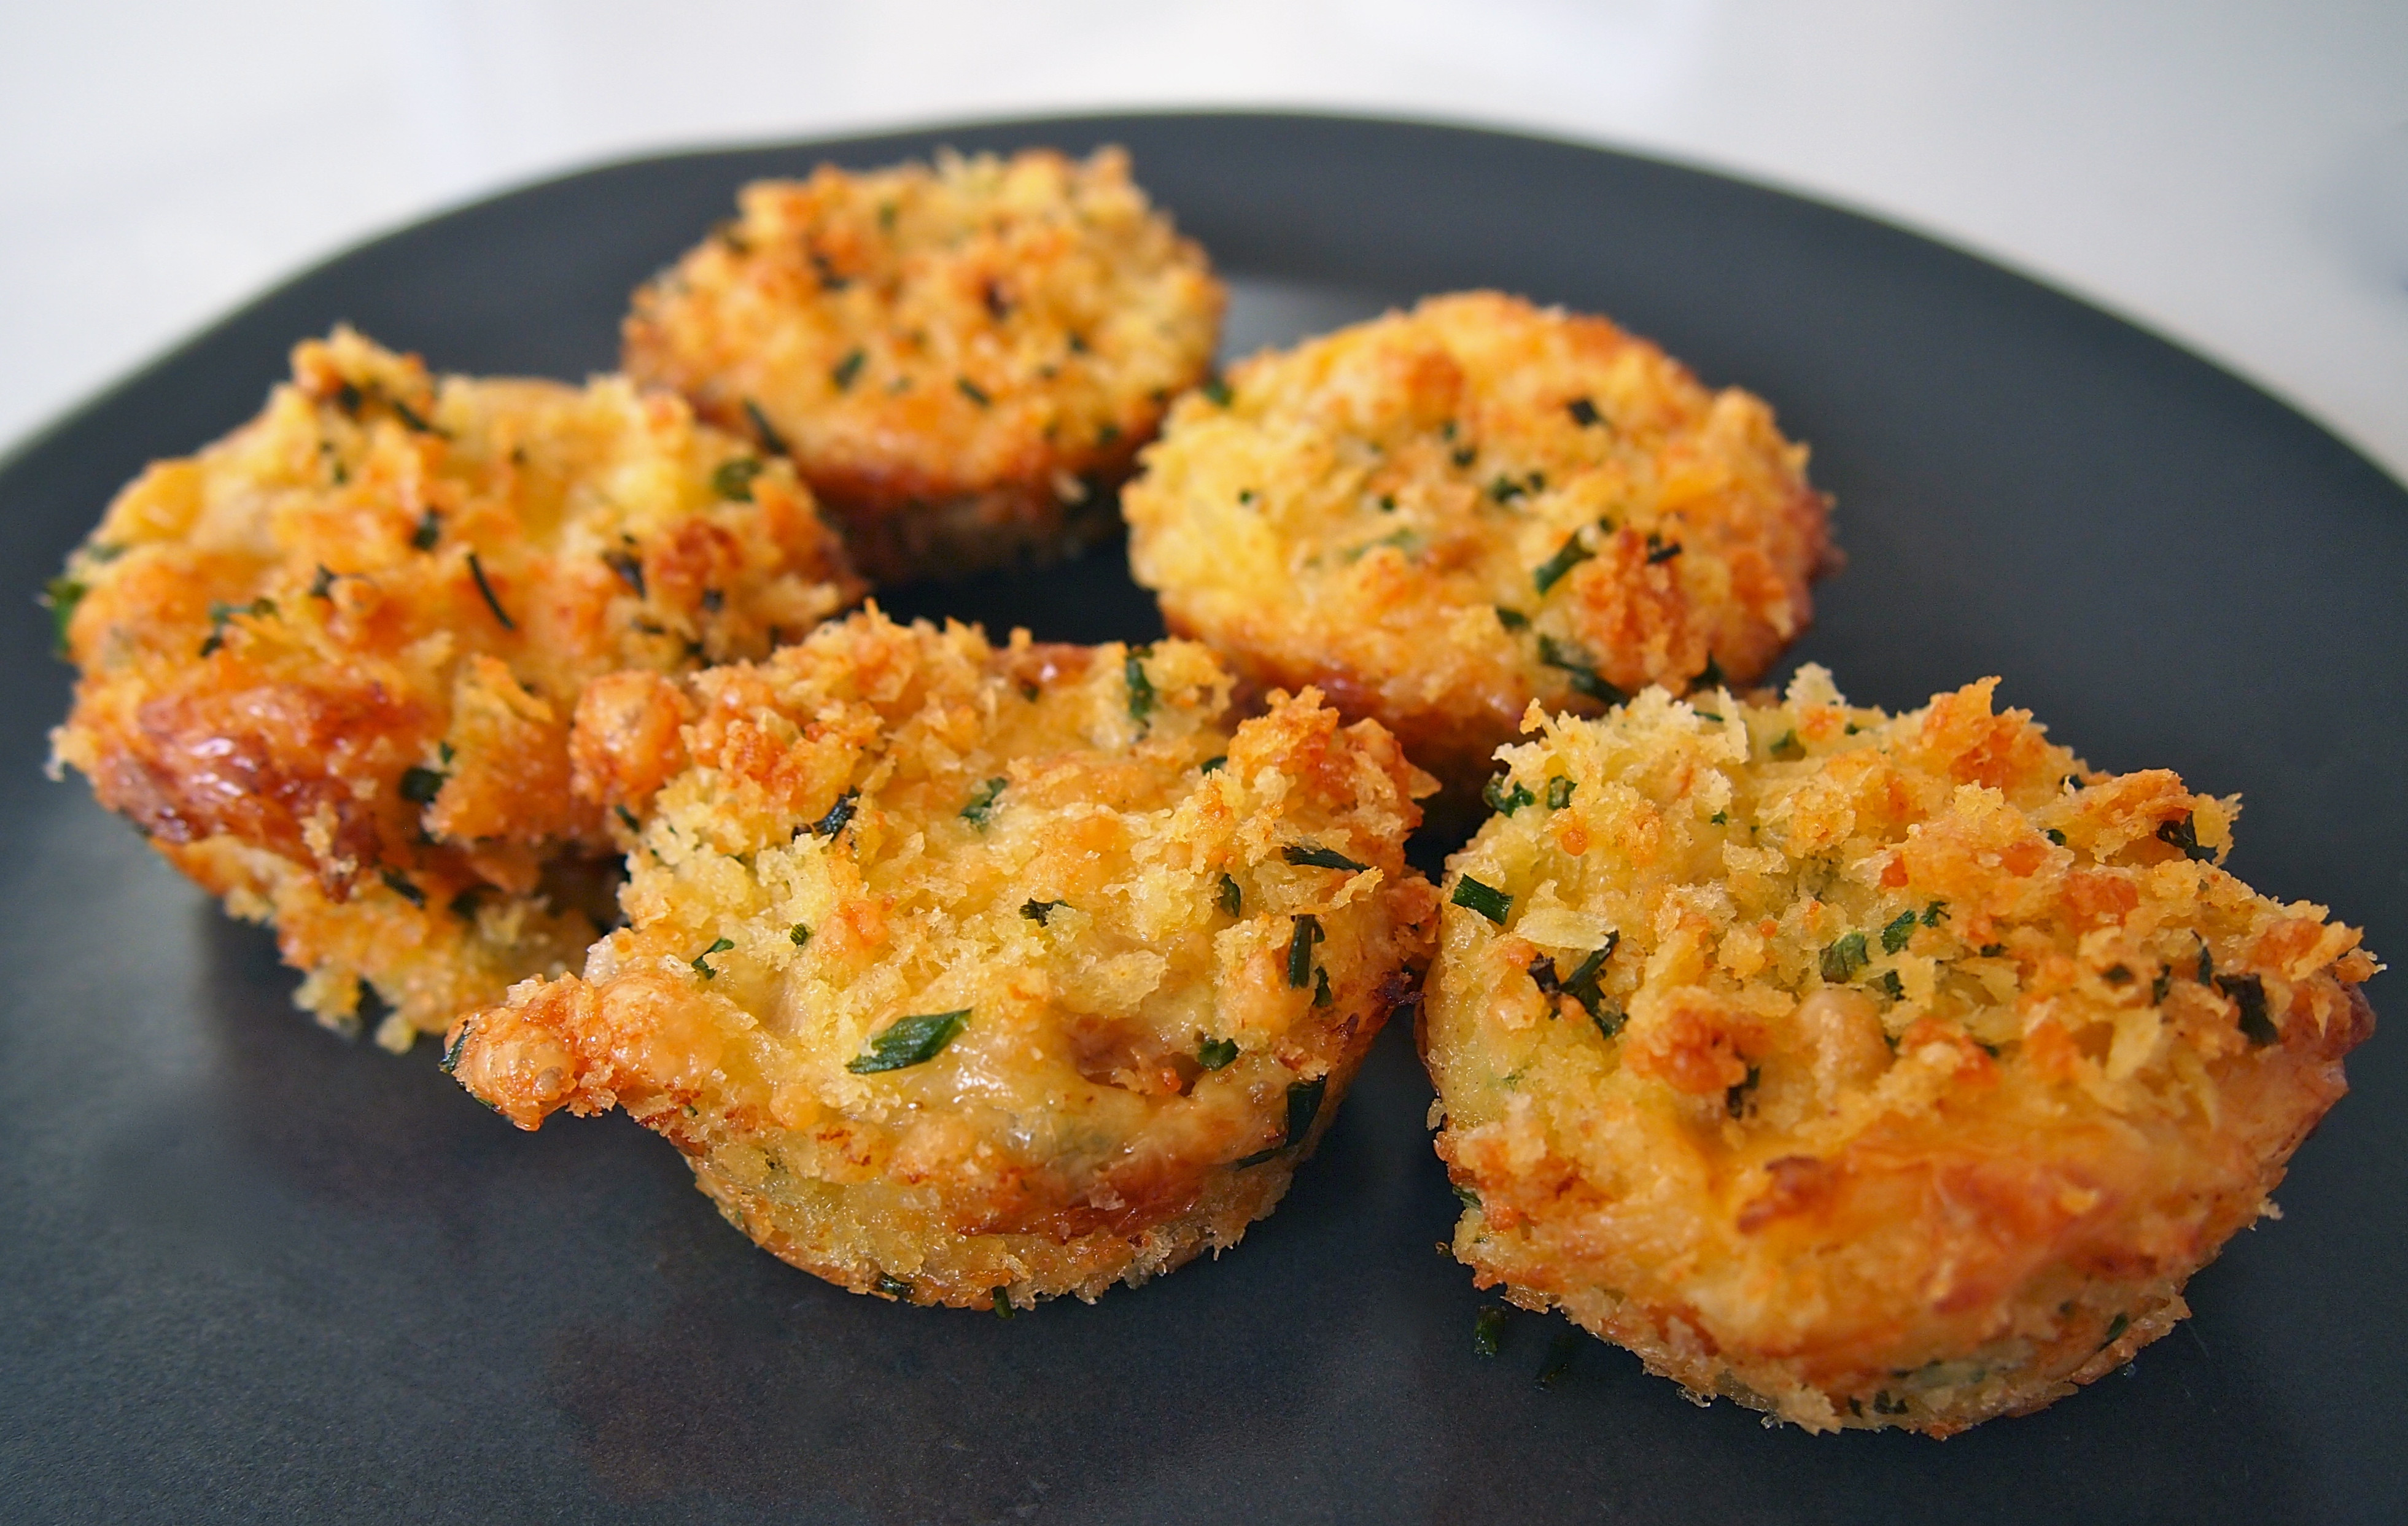 Crab Cake Recipe Baked
 Baked Mini Crab Cakes – The Perfect Way to Kick off New